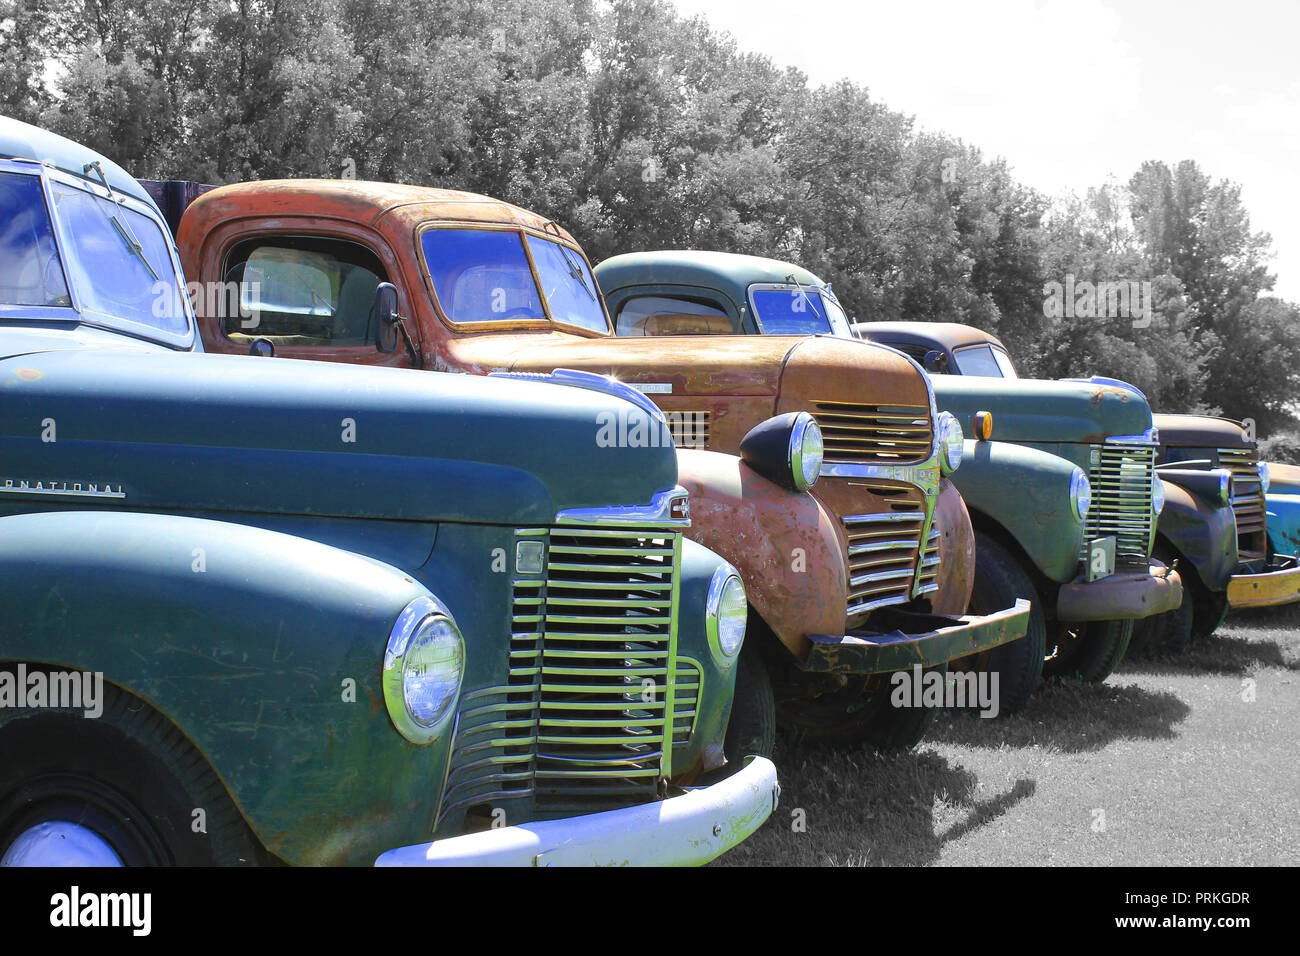 Colorful antique trucks in a row Stock Photo